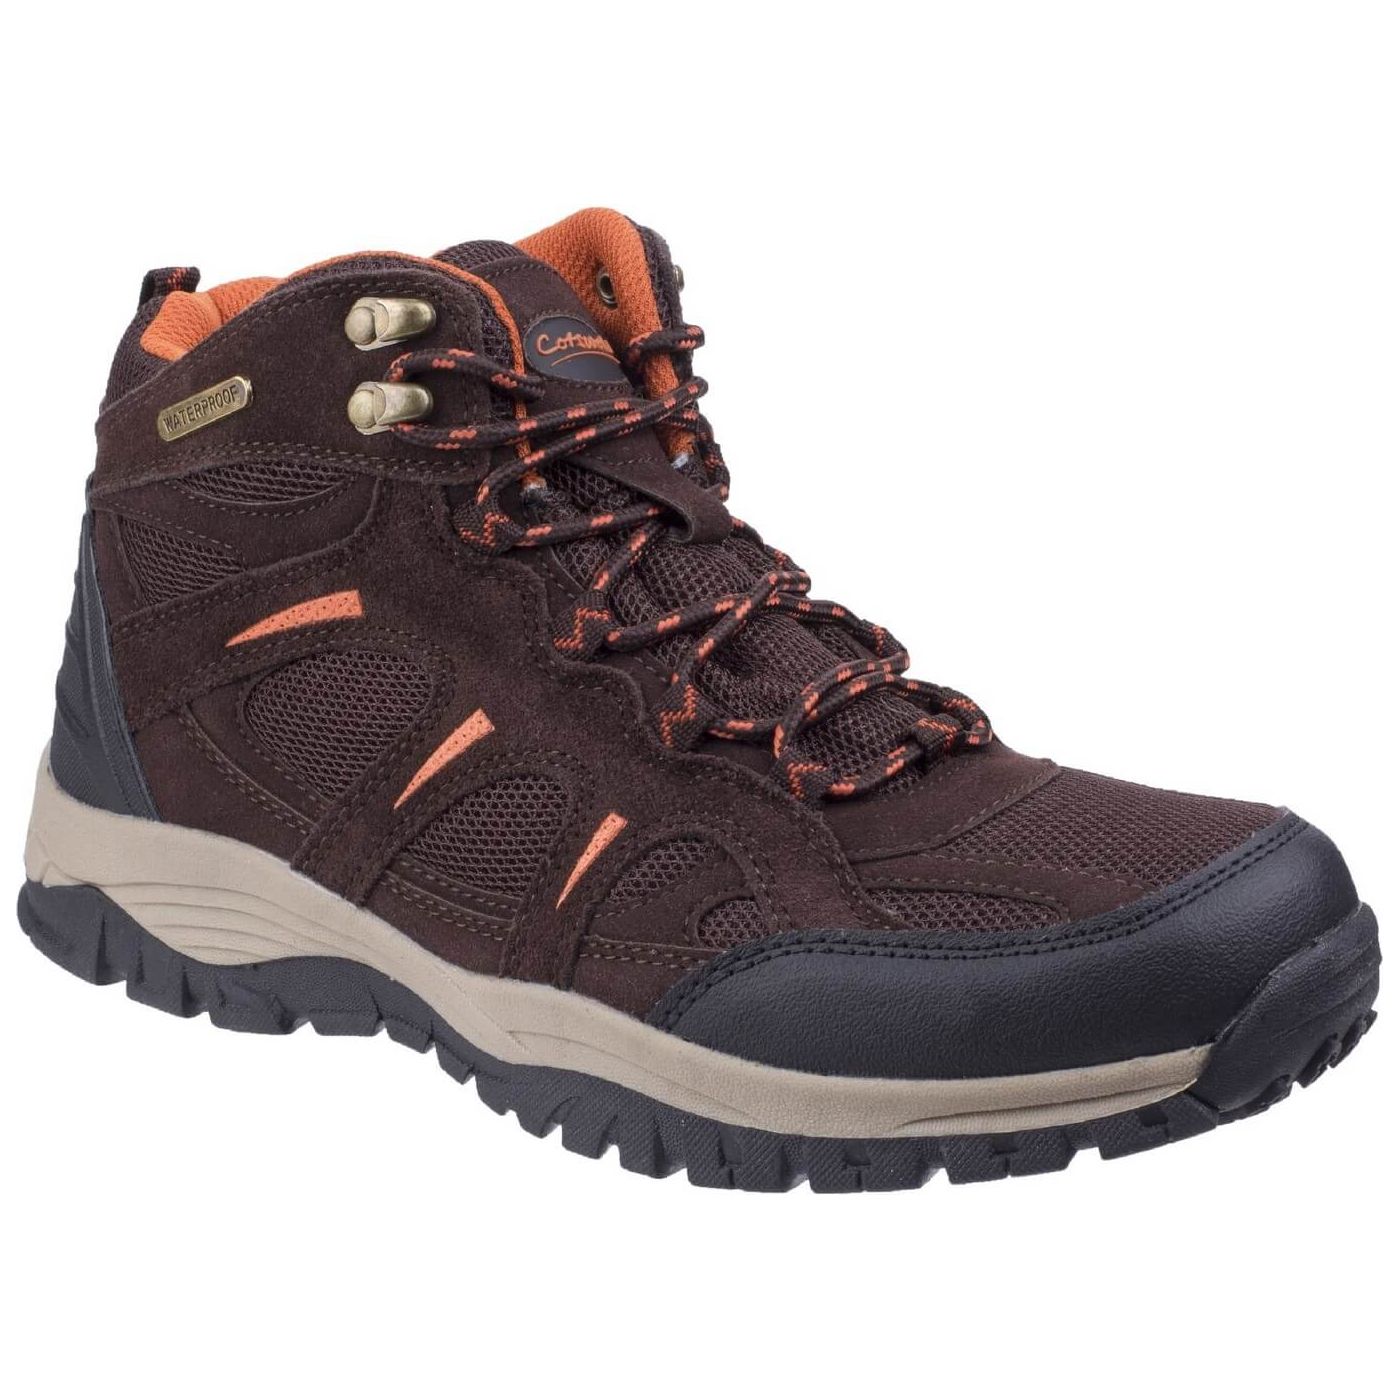 Cotswold Stowell Hiking Boots Mens